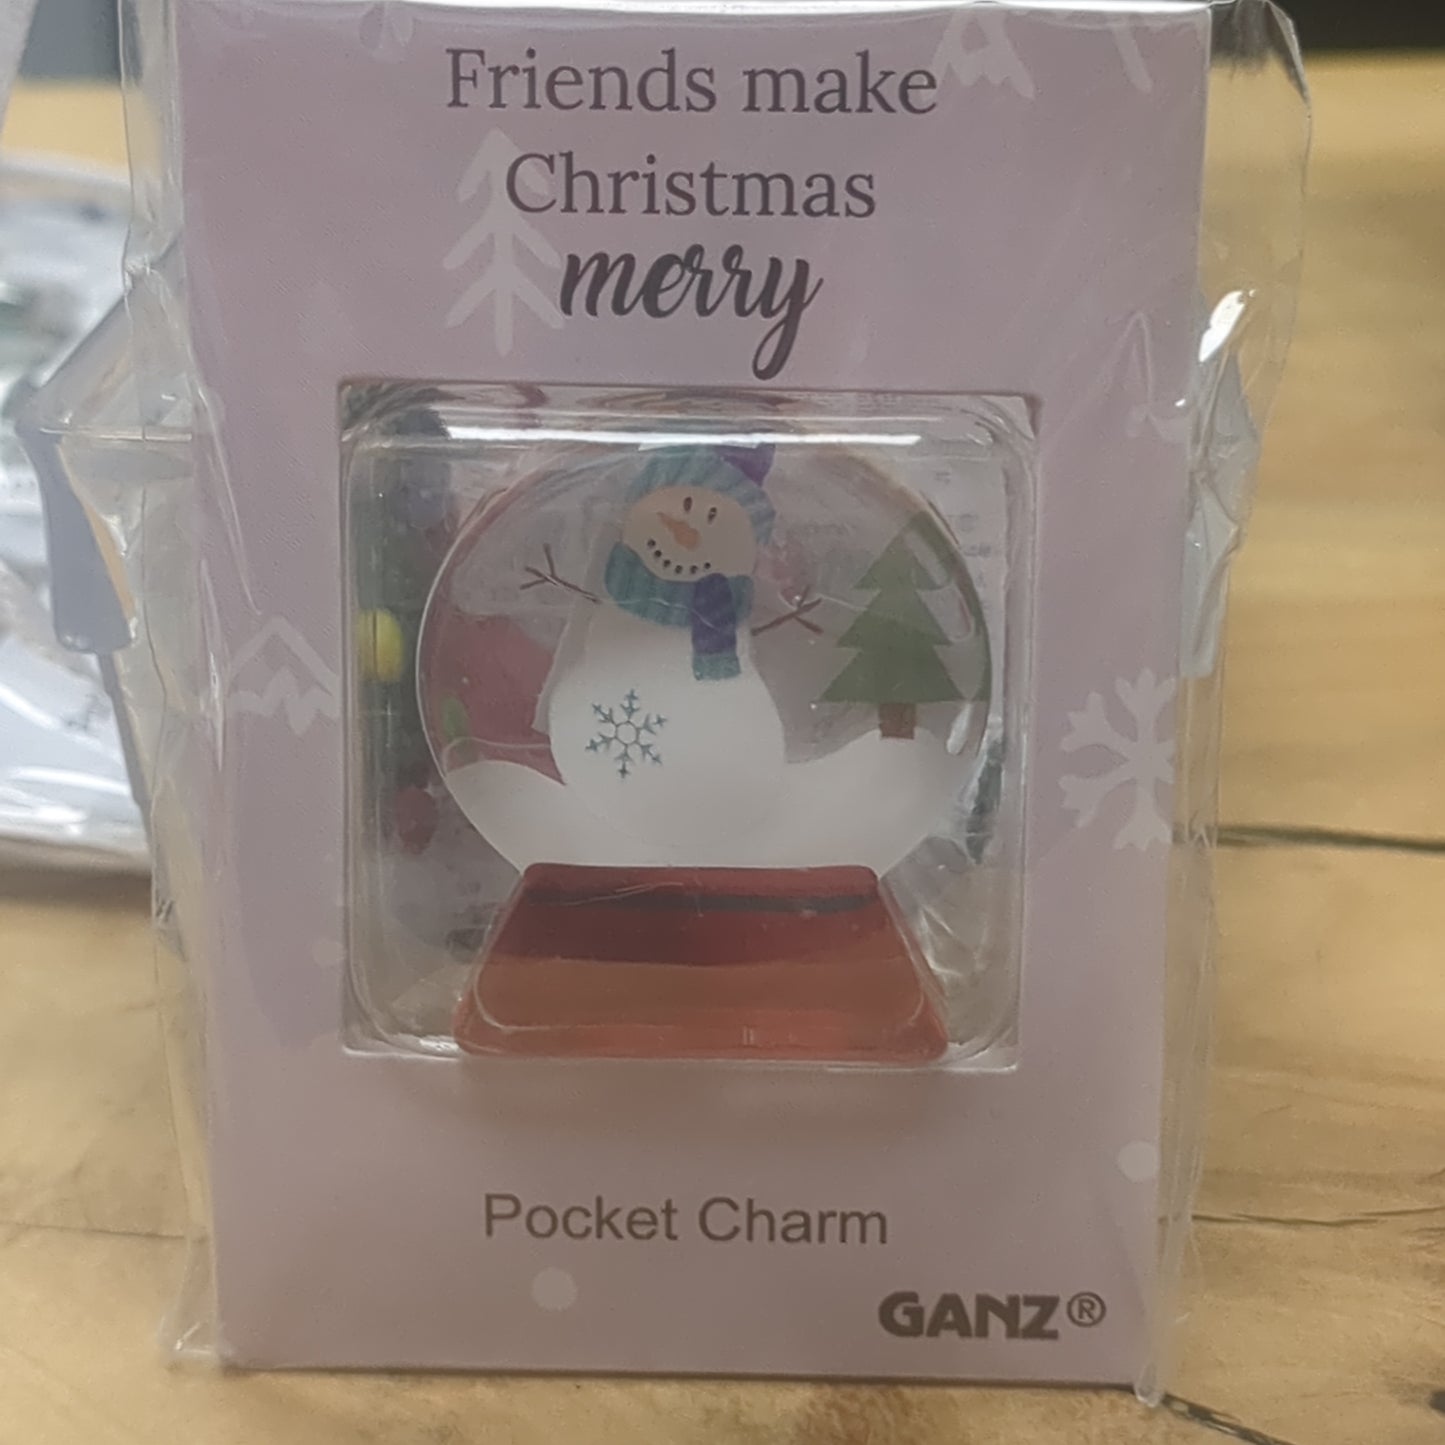 Pocket charm snow globe appearance with snowman inside. friends Make Christmas Merry